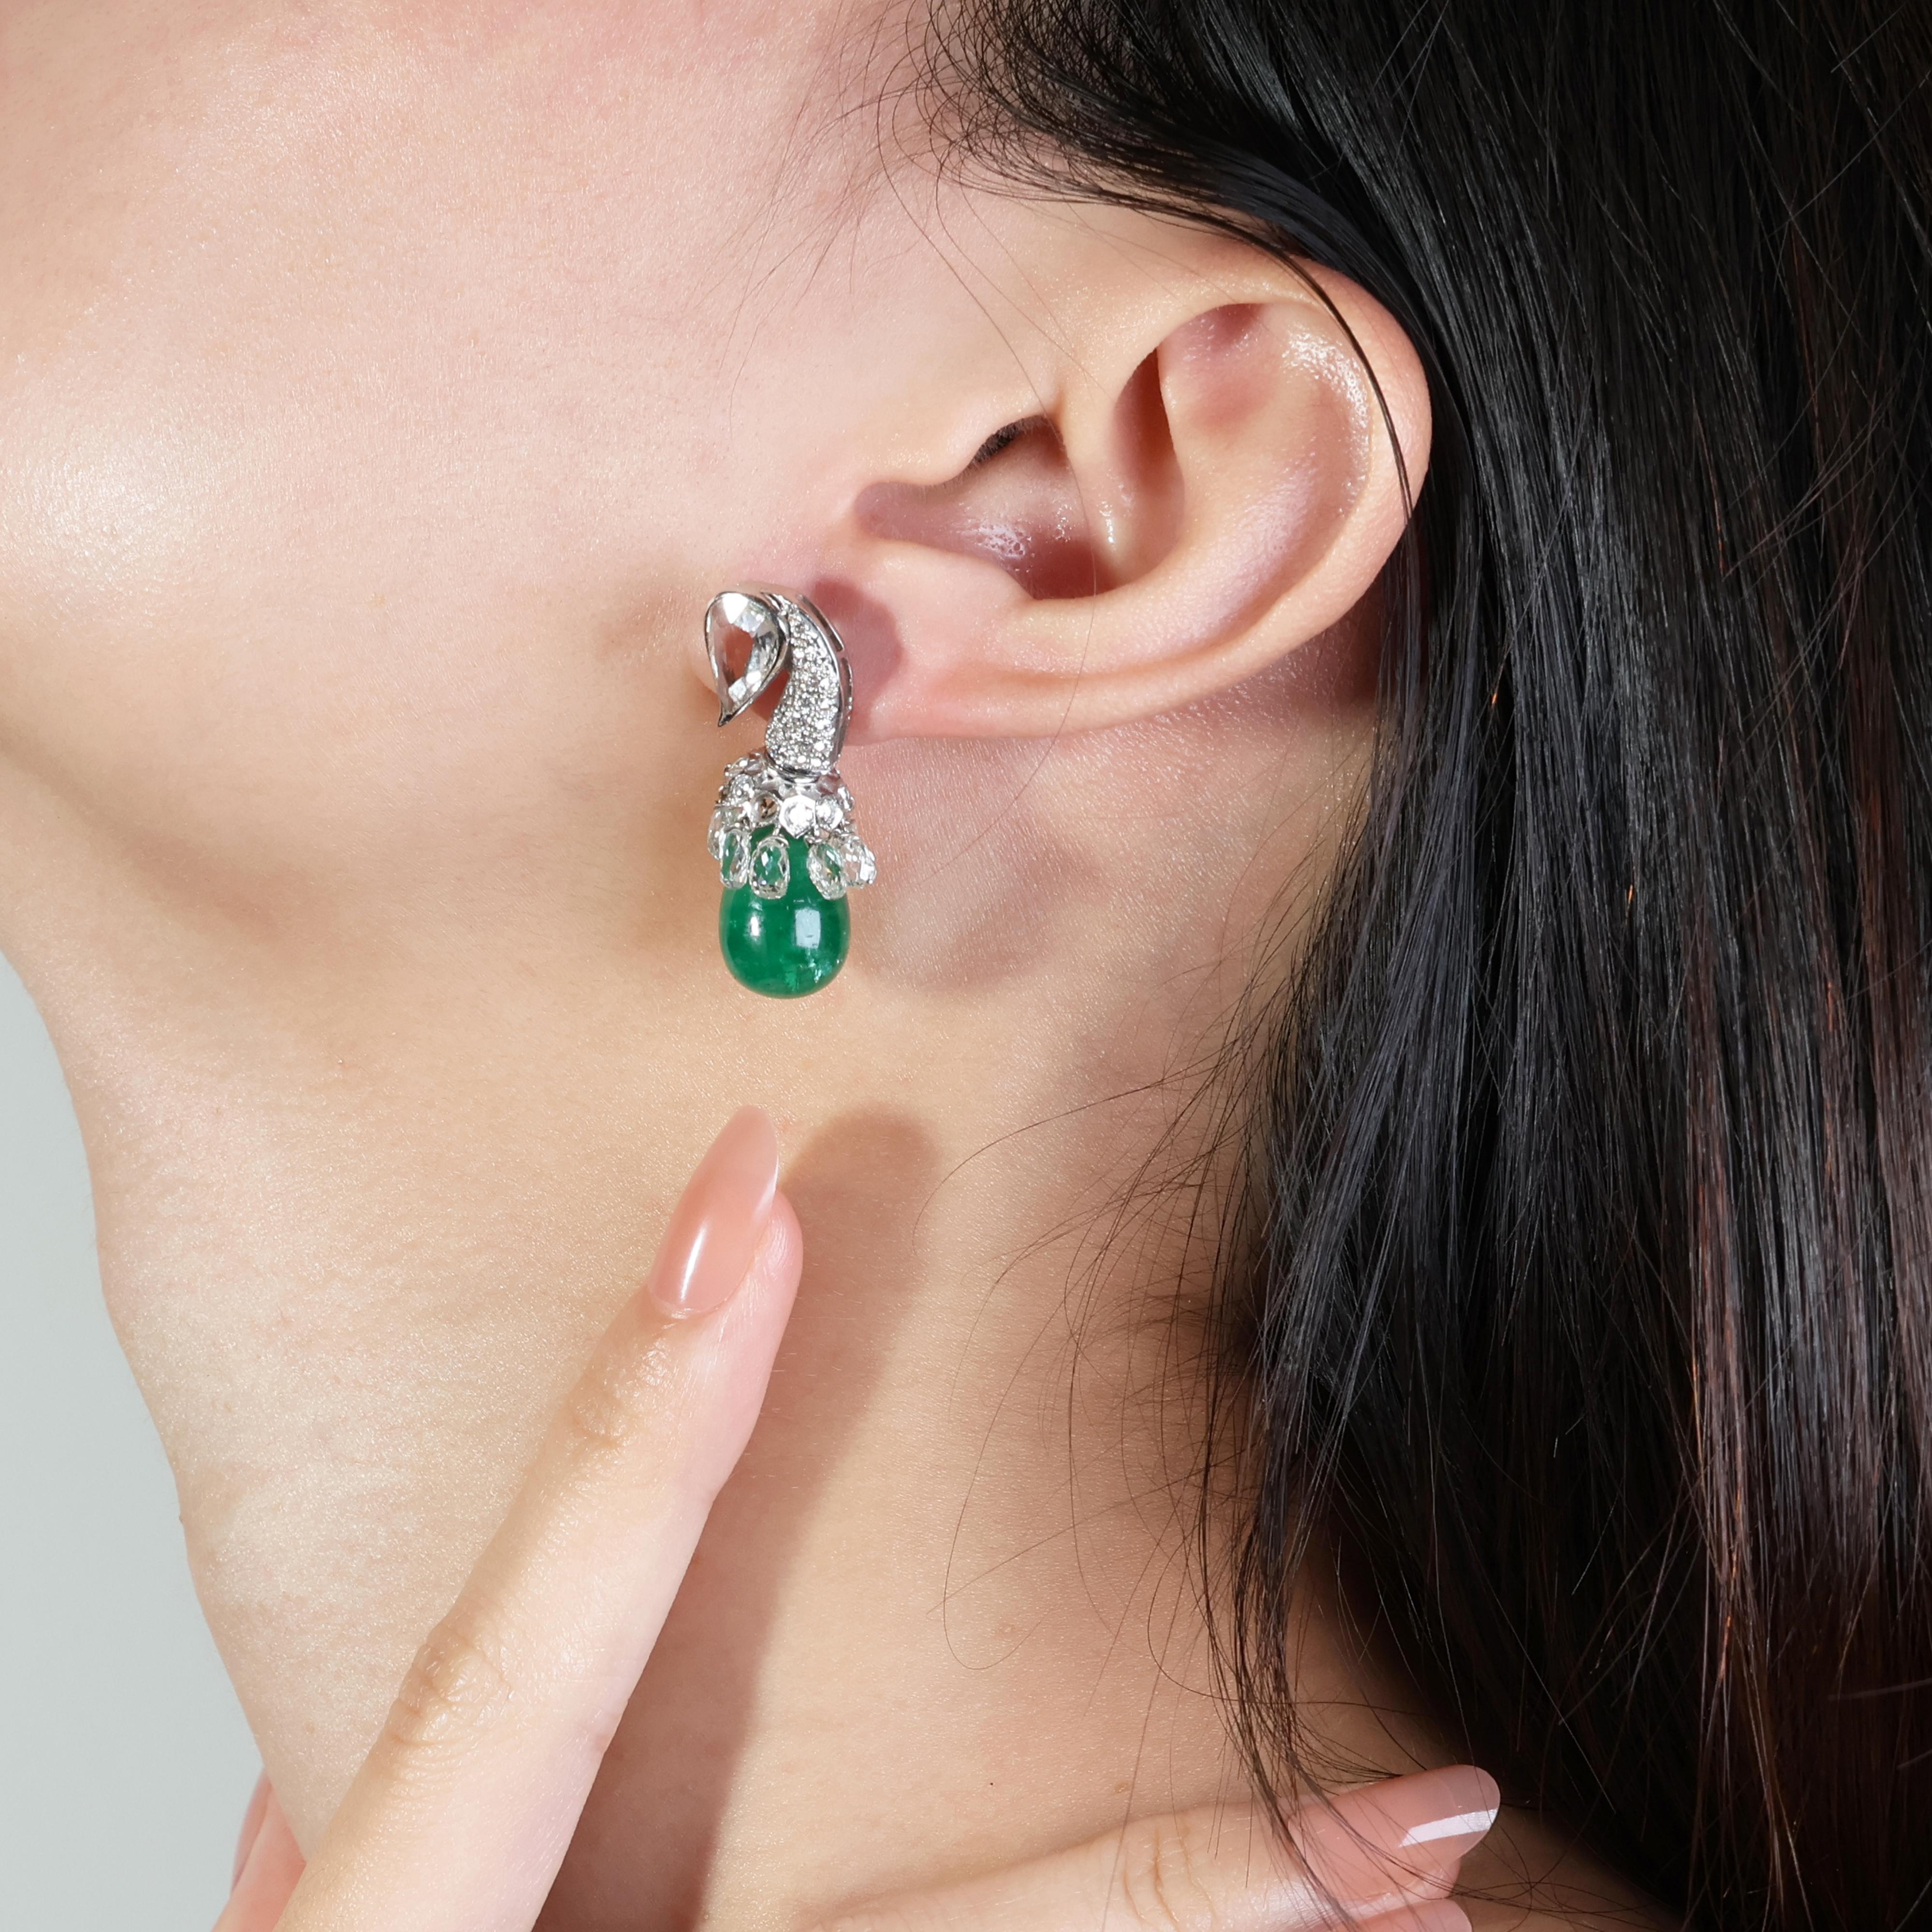 Immerse yourself in the brilliance of these captivating 18k white gold earrings, where two captivating emeralds, are surrounded by a dazzling symphony of diamonds.

Own a piece of jewelry that transcends trends and embodies timeless elegance. These